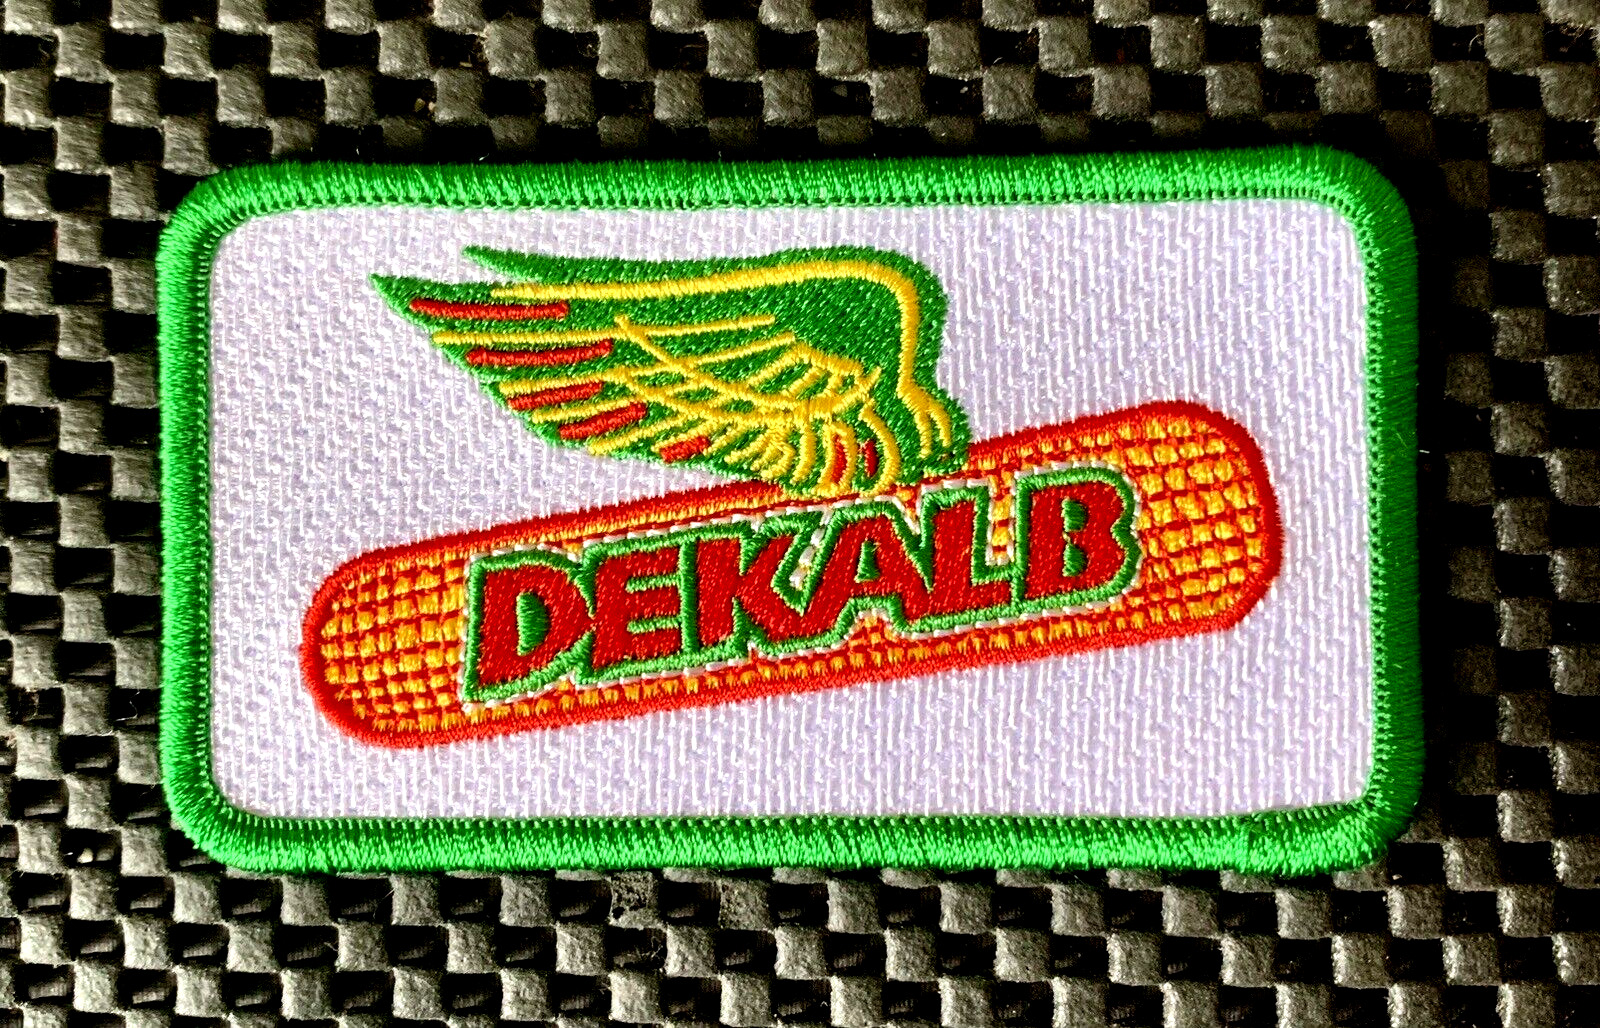 DEKALB EMBROIDERED SEW ON PATCH CORN SEED FARMING 4\